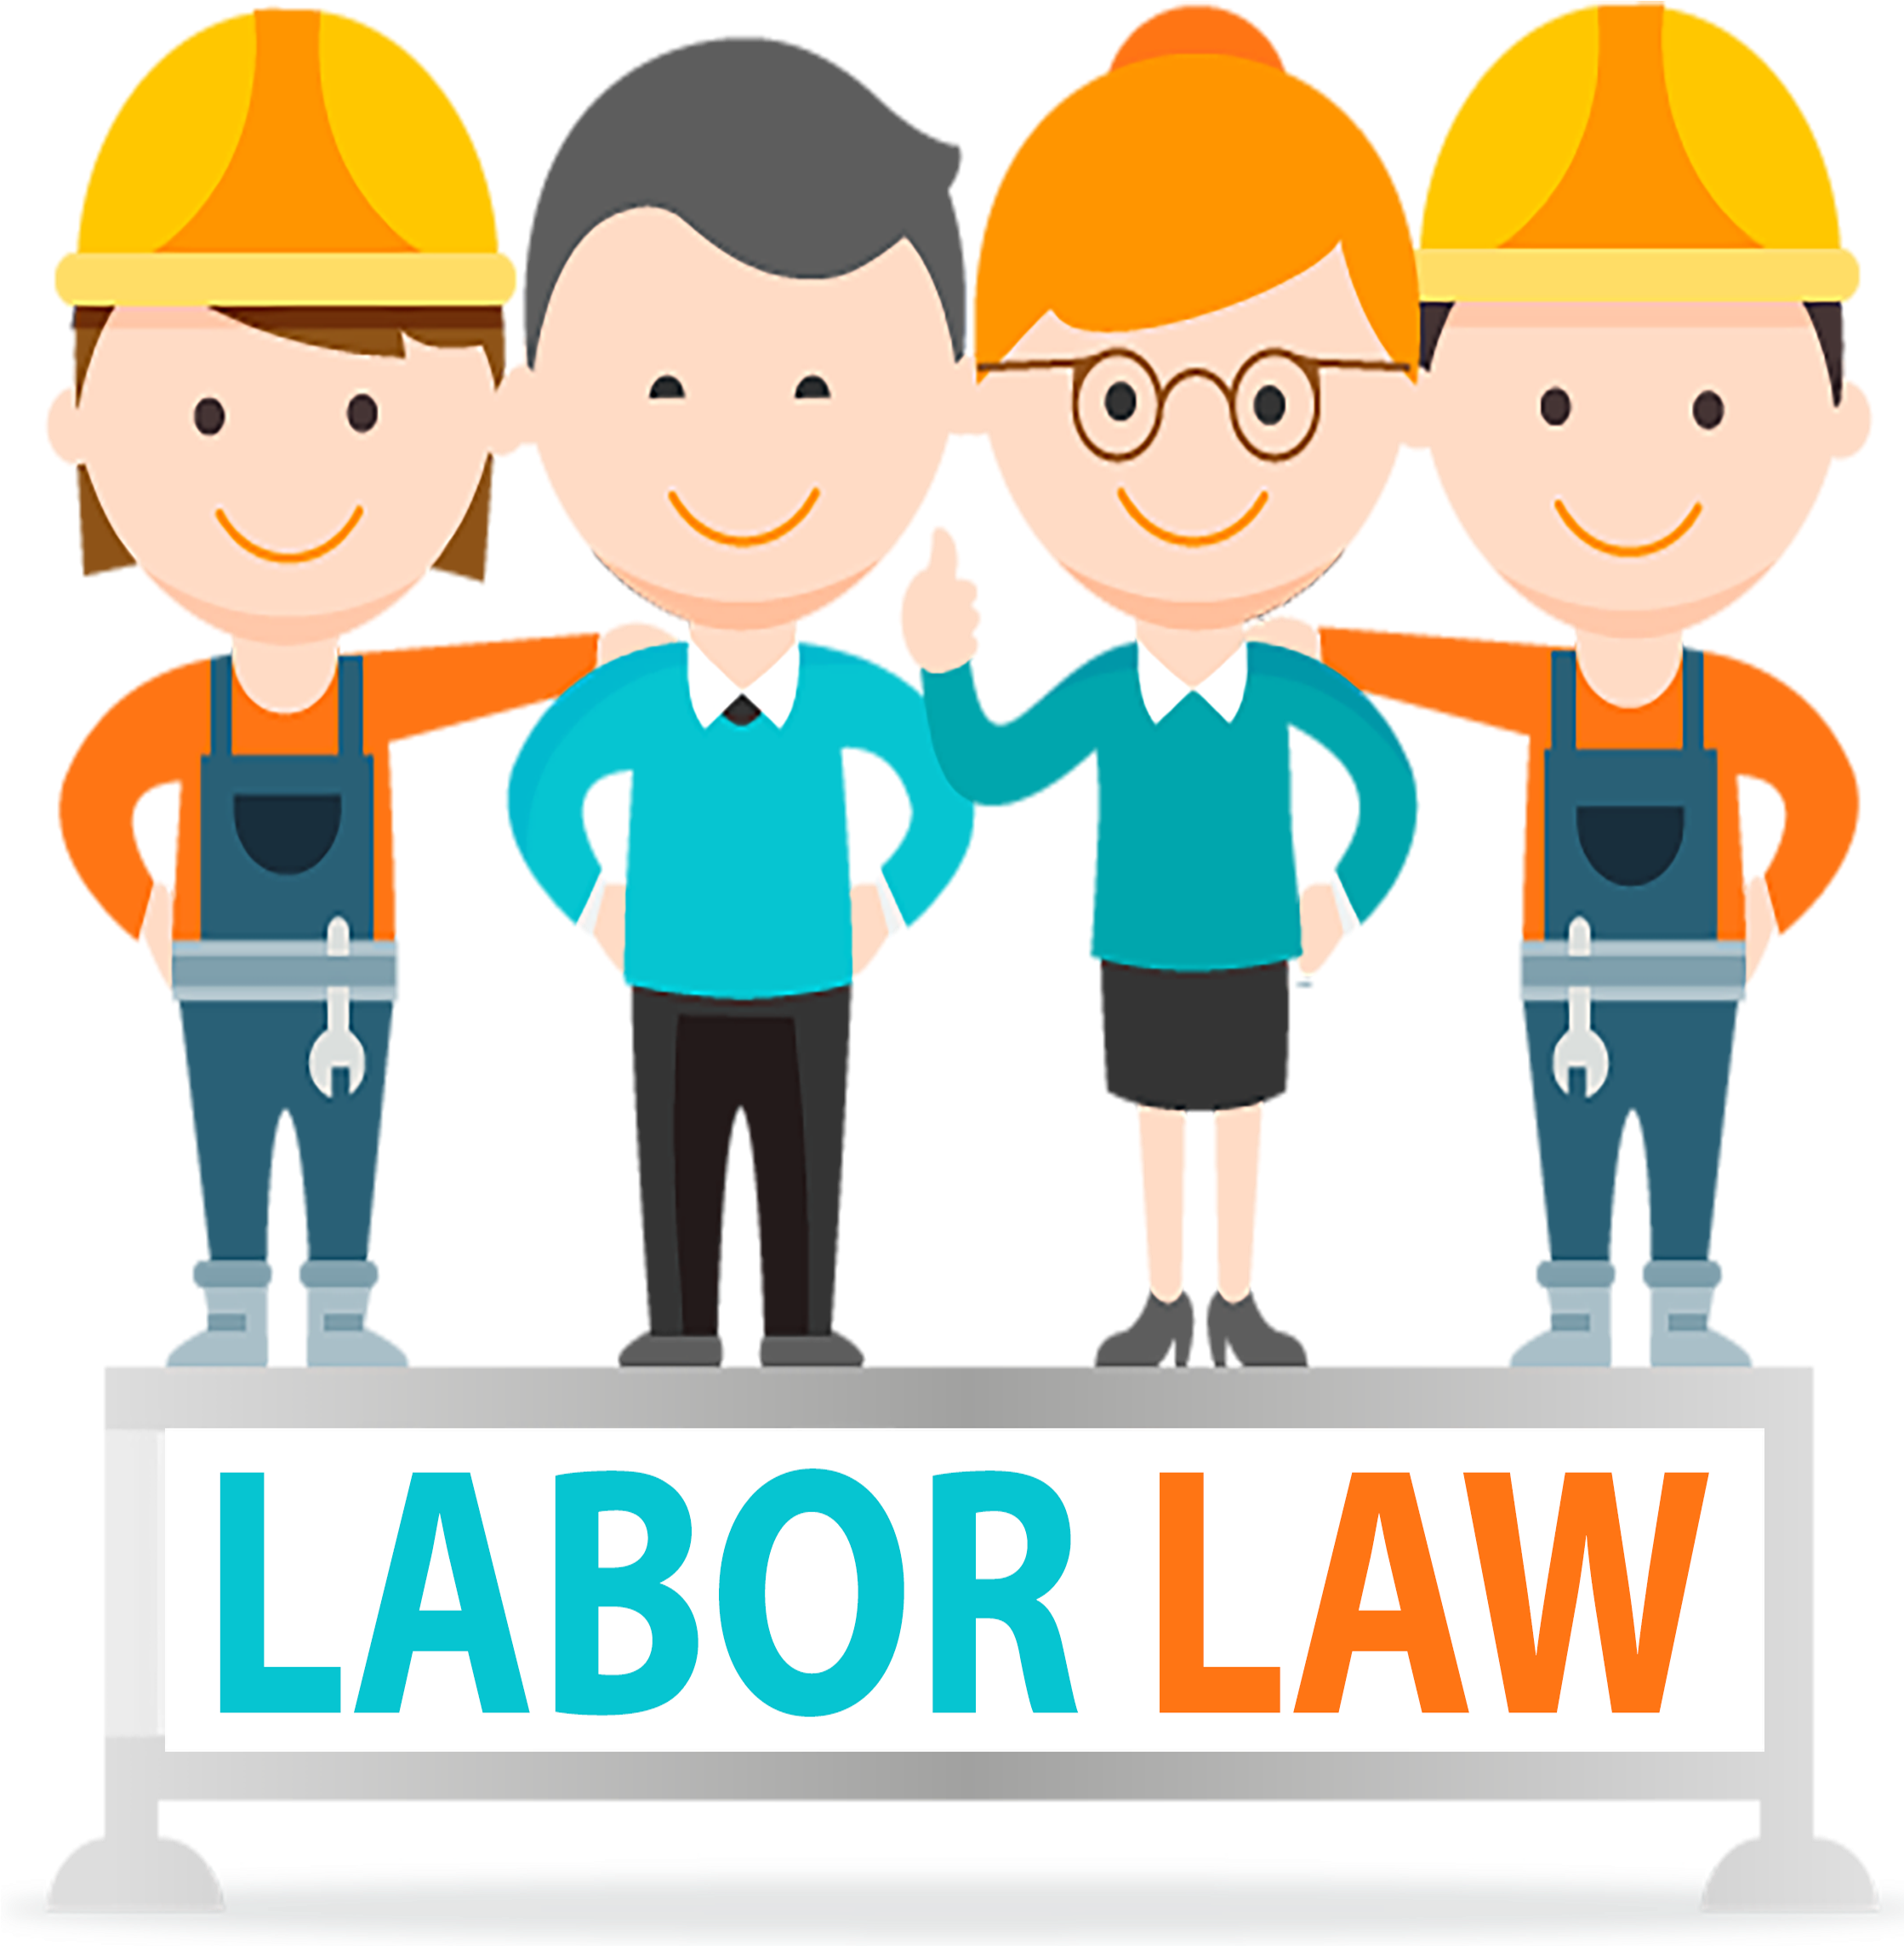 Advanced Labor Law Training Course Rh Realhandson Com - International Workers' Day (2237x2778)